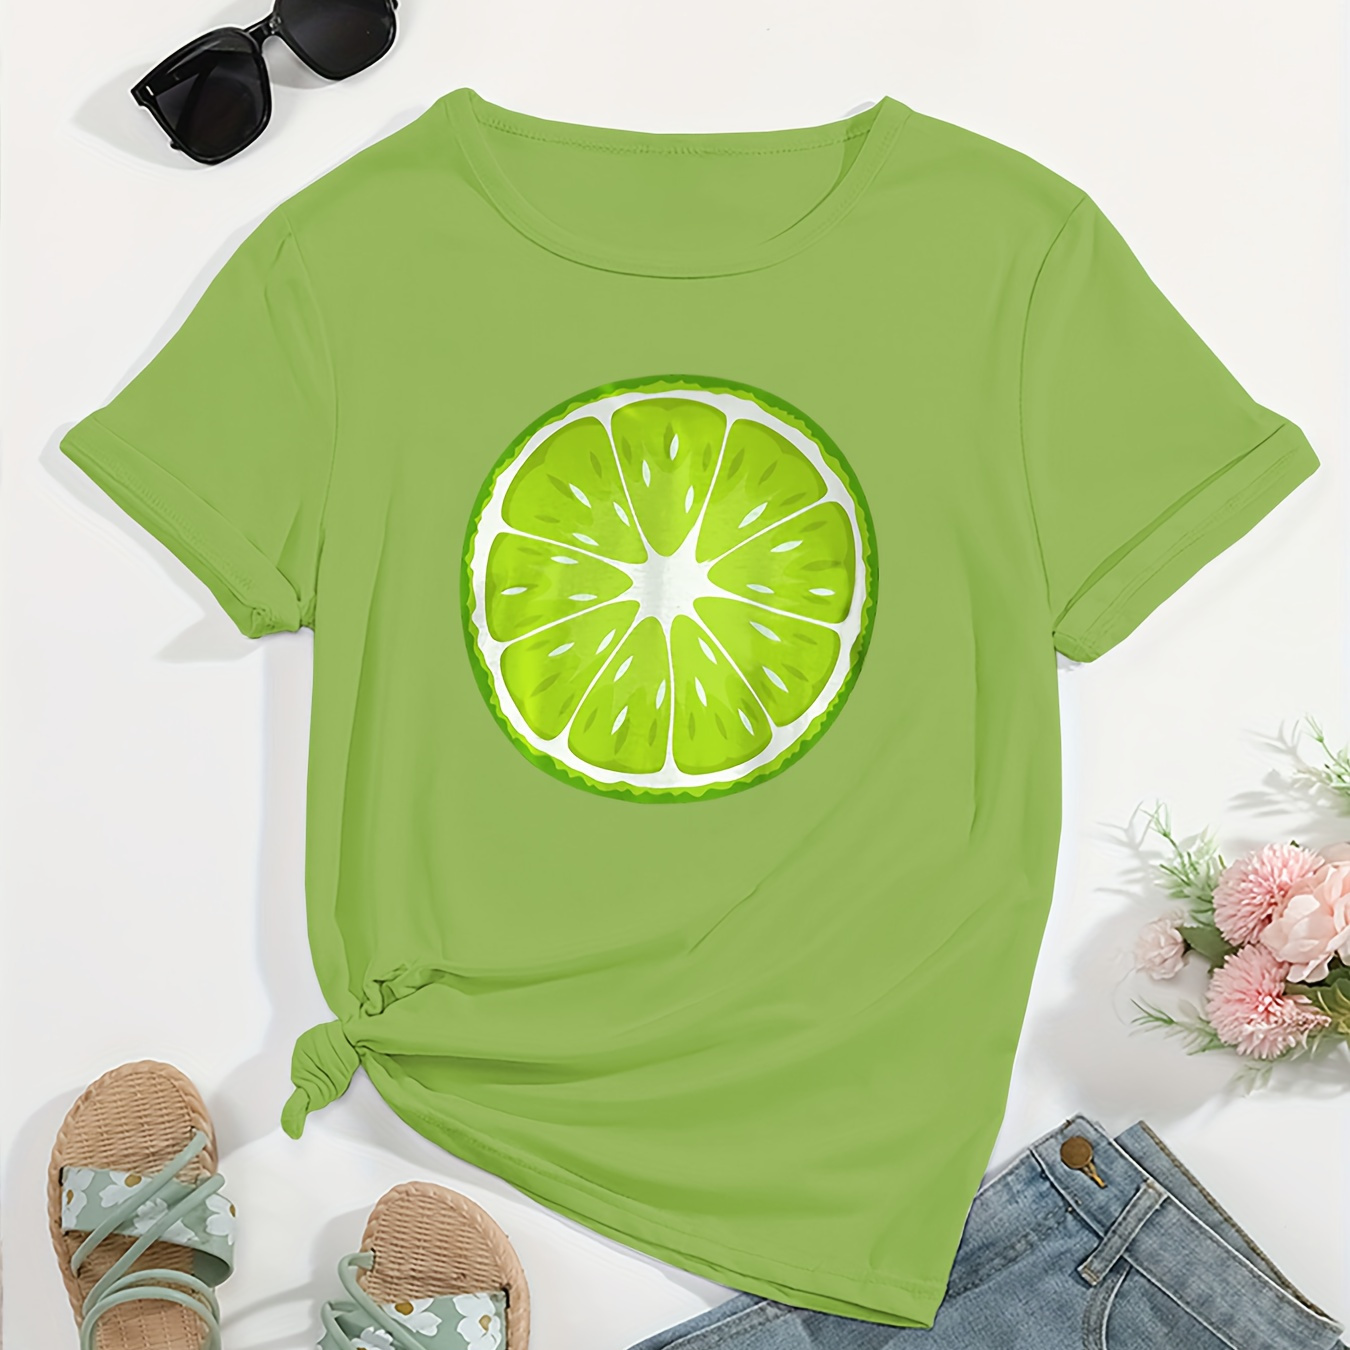 

Women's Casual Short Sleeve T-shirt With Refreshing Lime Print, Soft Comfortable Summer Tee